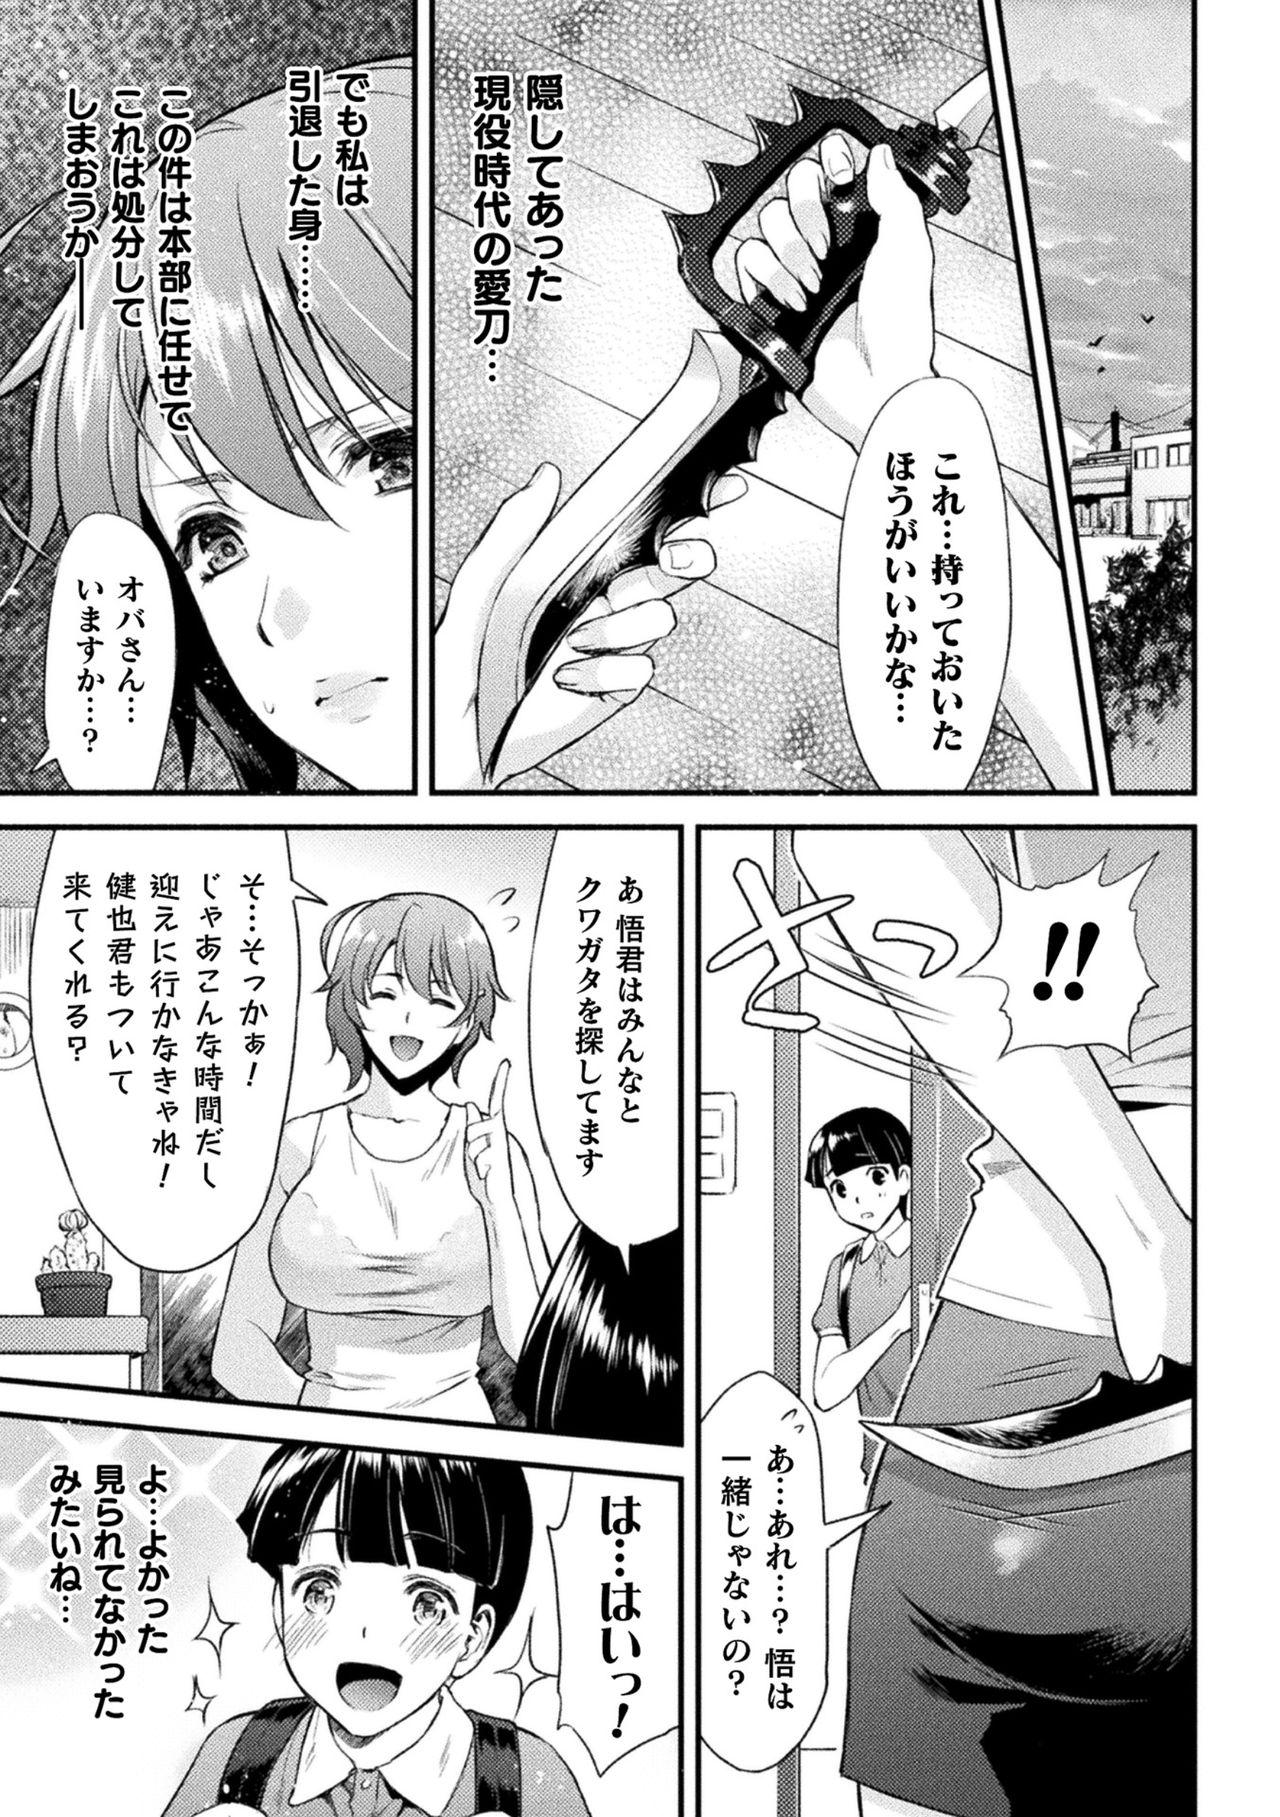 Audition Mama Wa Taimanin THE COMIC Ch. 1-9 Tanned - Page 10